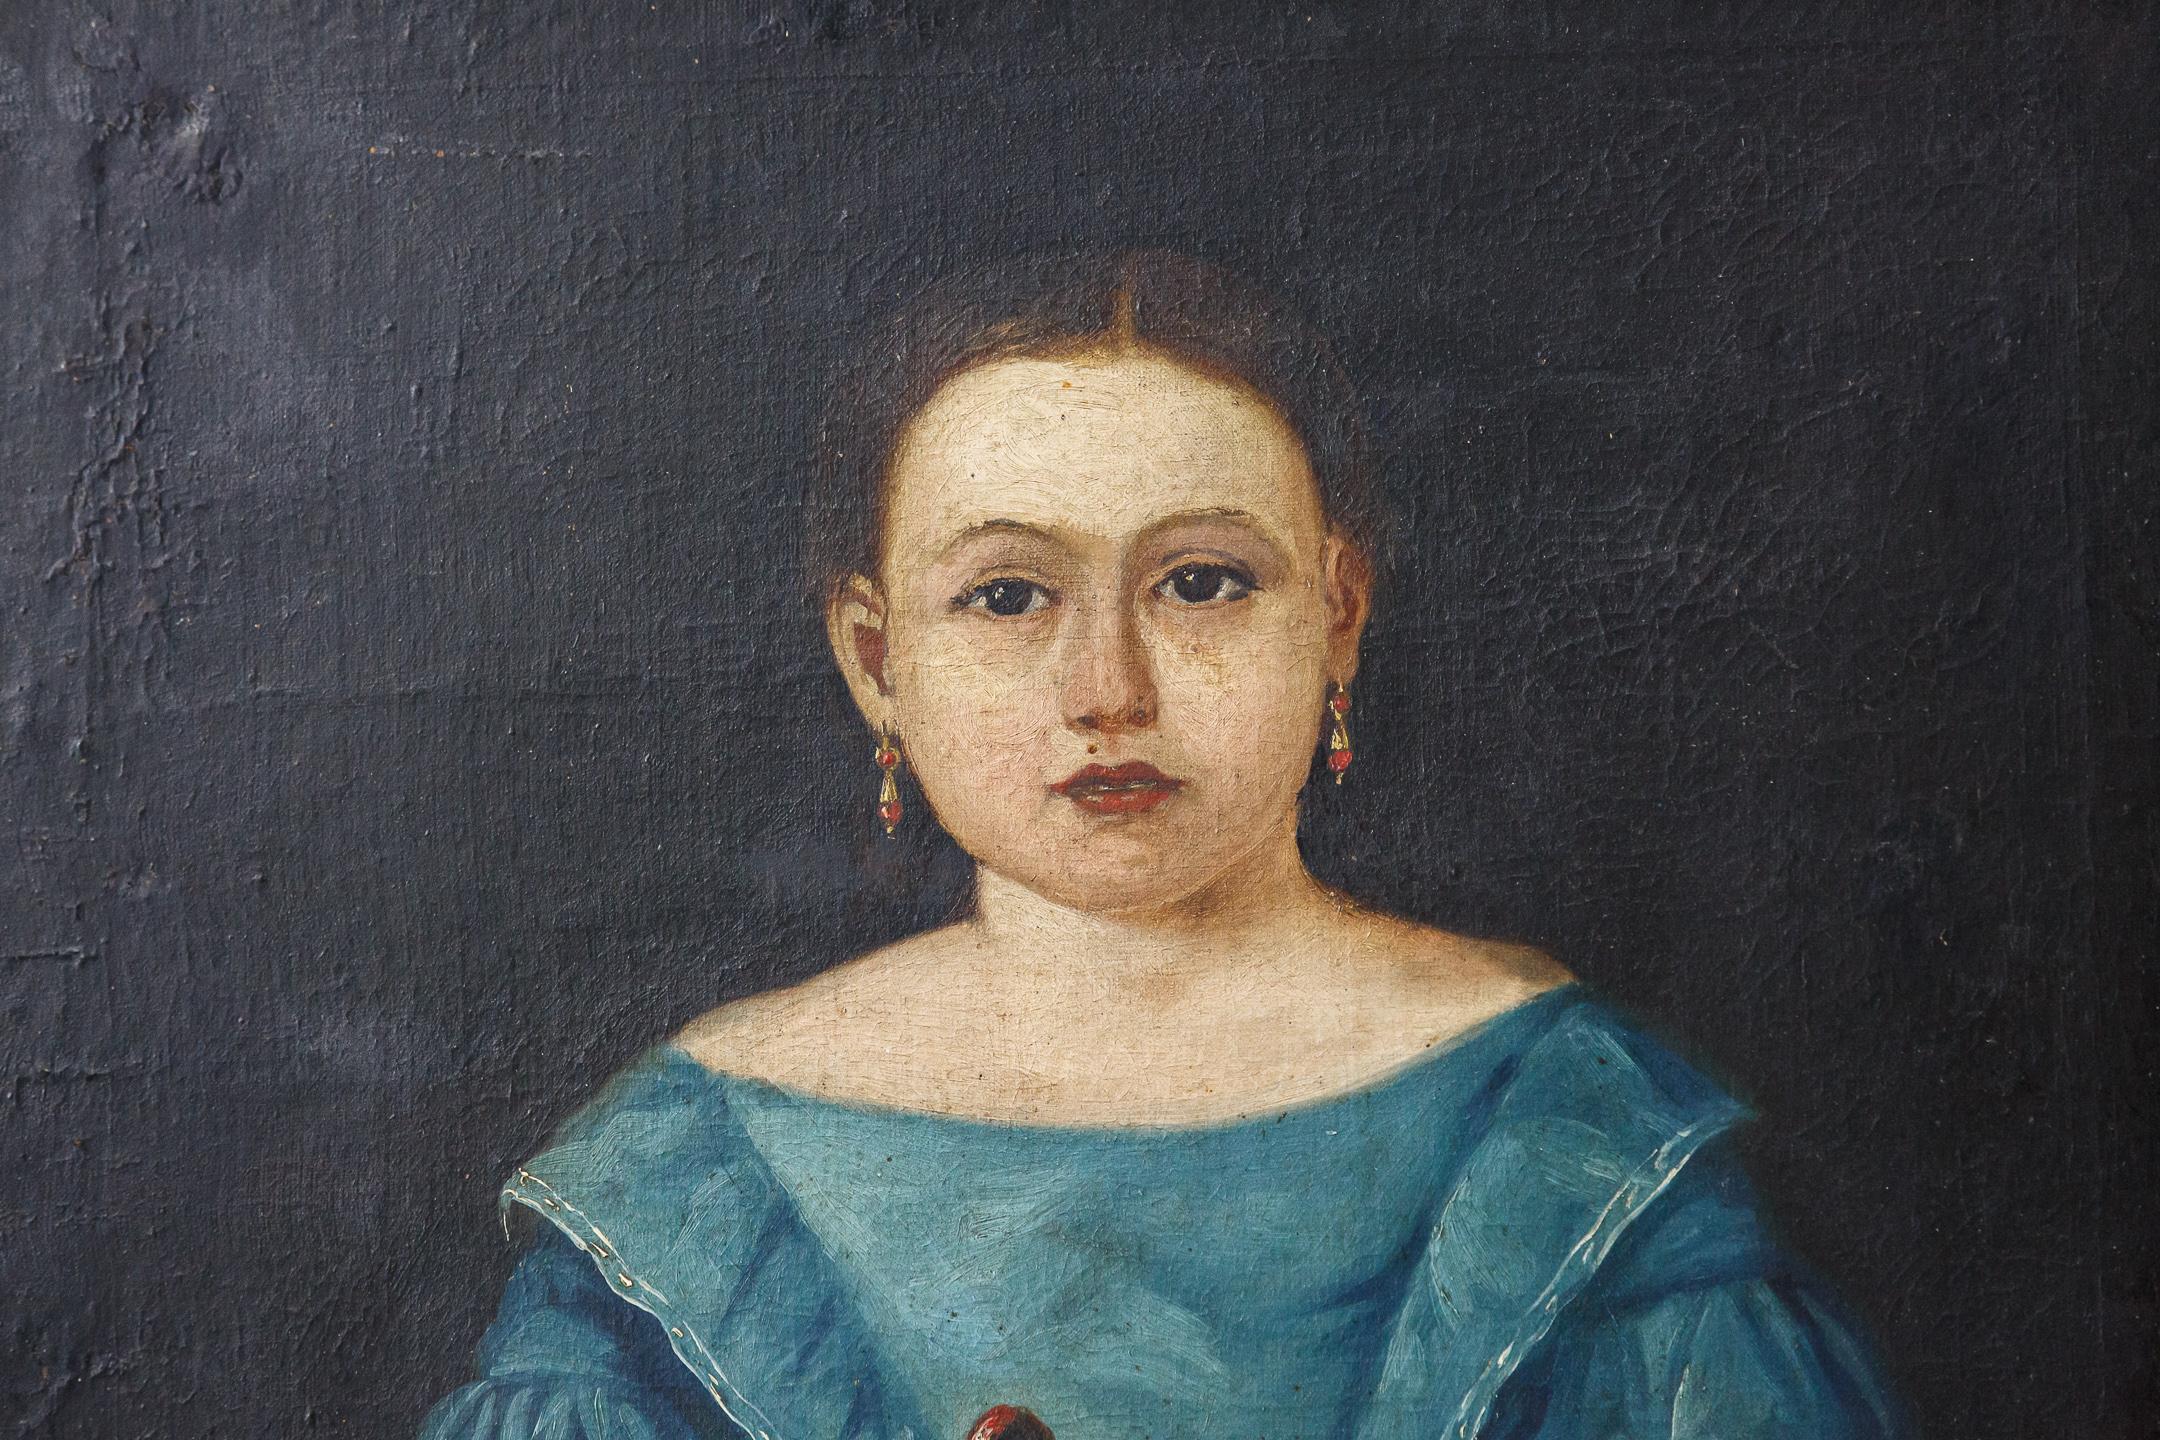 Painted Naive 19th Century Oil on Canvas Portrait of a Girl Holding a Bird